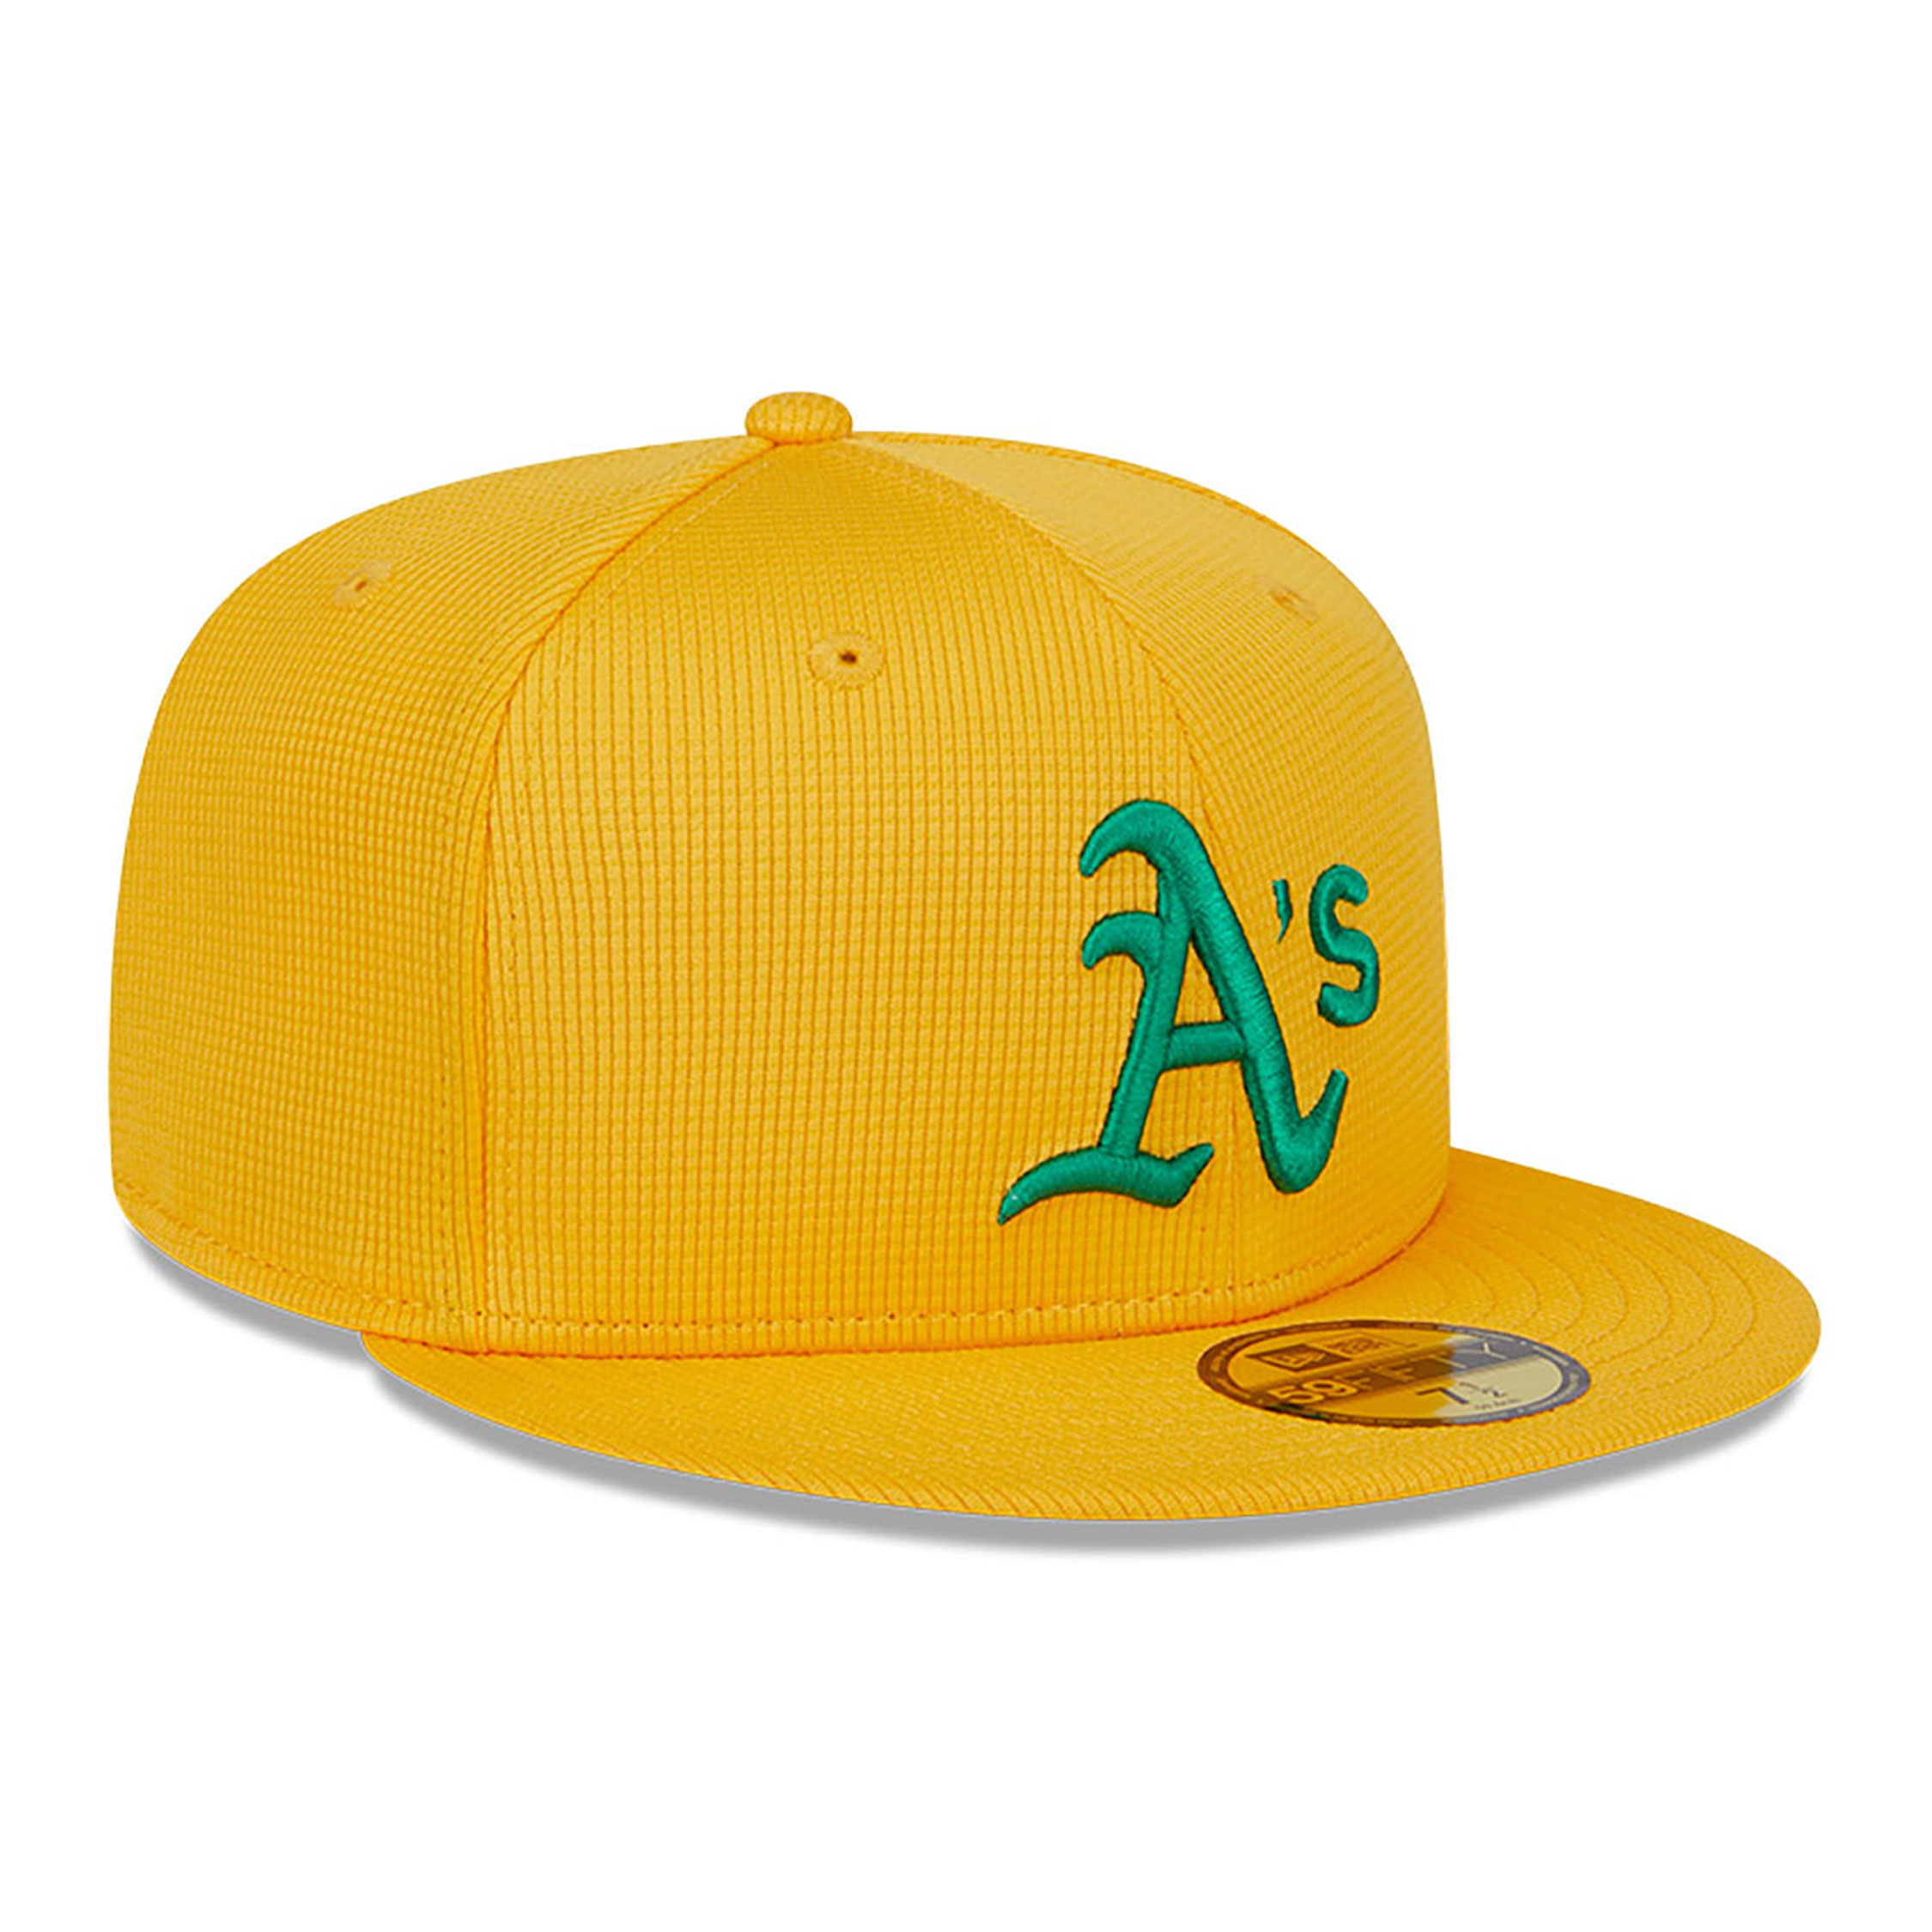 Oakland Athletics Spring Training Yellow 59FIFTY Fitted Cap